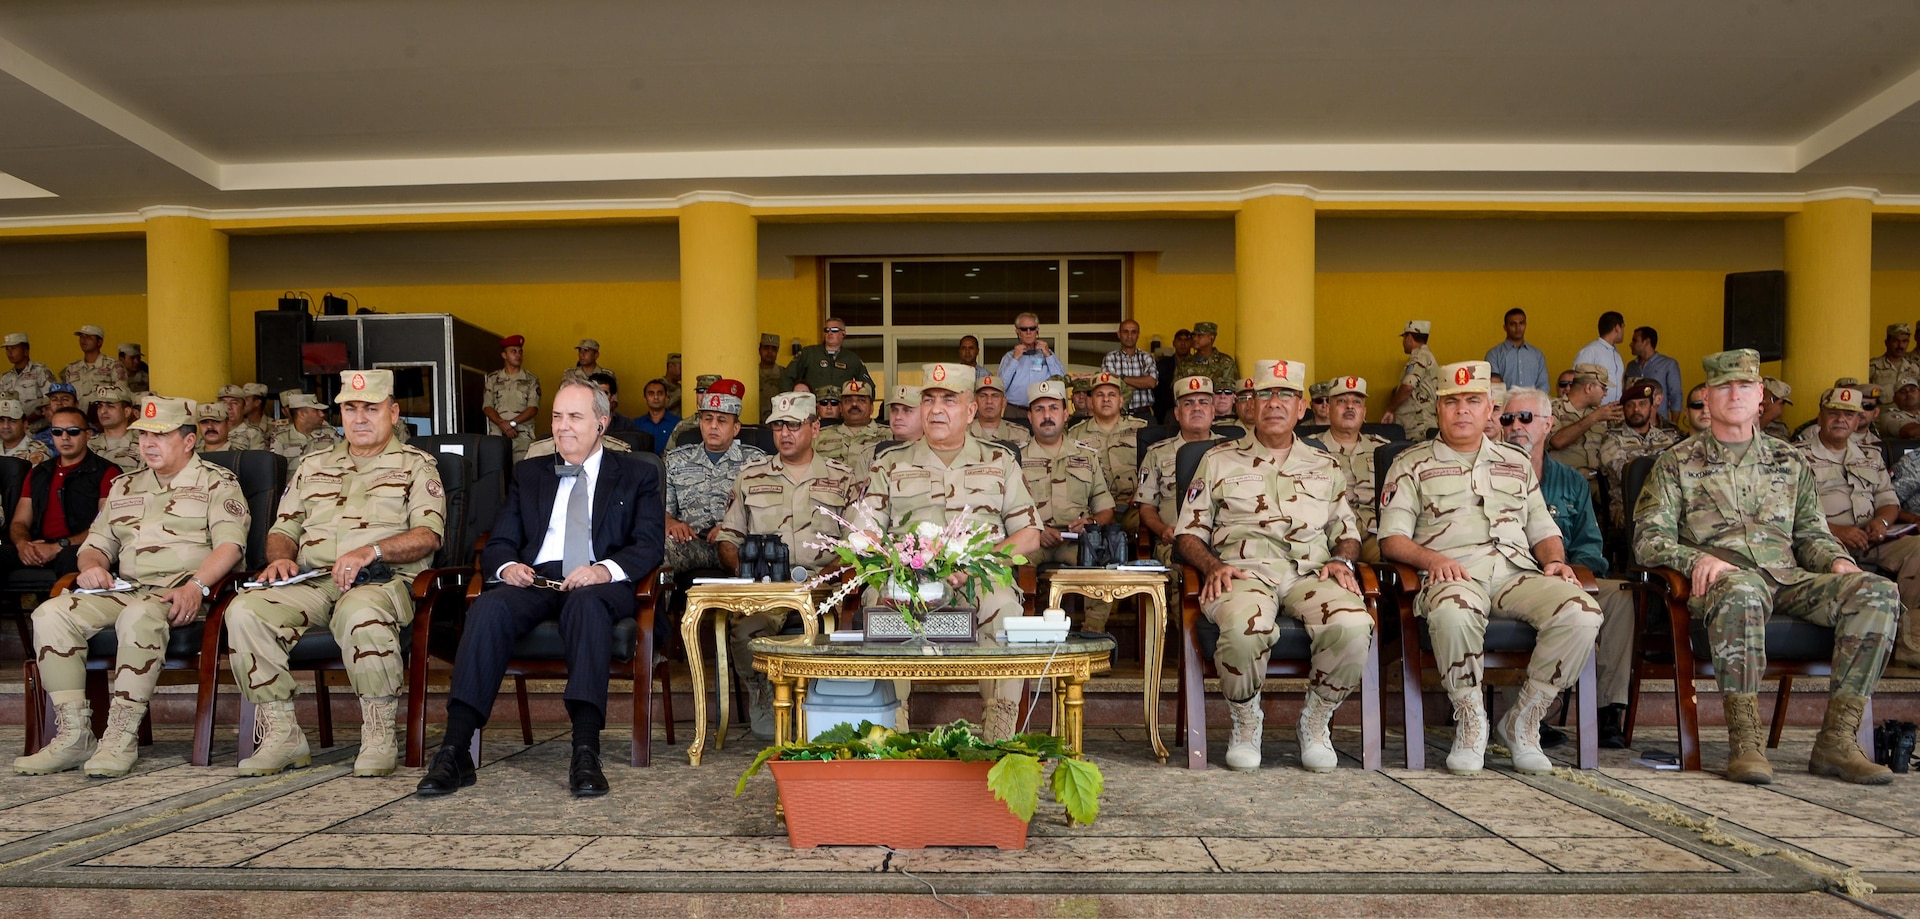 Thomas Goldberger, The U.S. Embassy’s Charge d’ Affaires to Egypt, along with U.S. and Egyptian senior leaders watch a combined arms live fire exercise demonstration during Bright Star 2017, Sept. 20, 2017, at Mohamed Naguib Military Base, Egypt. Bright Star is a combined command-post and field training exercise aimed at enhancing regional security and stability by responding to modern-day security scenarios with the Arab Republic of Egypt. (U.S. Air Force photo by Staff Sgt. Michael Battles)